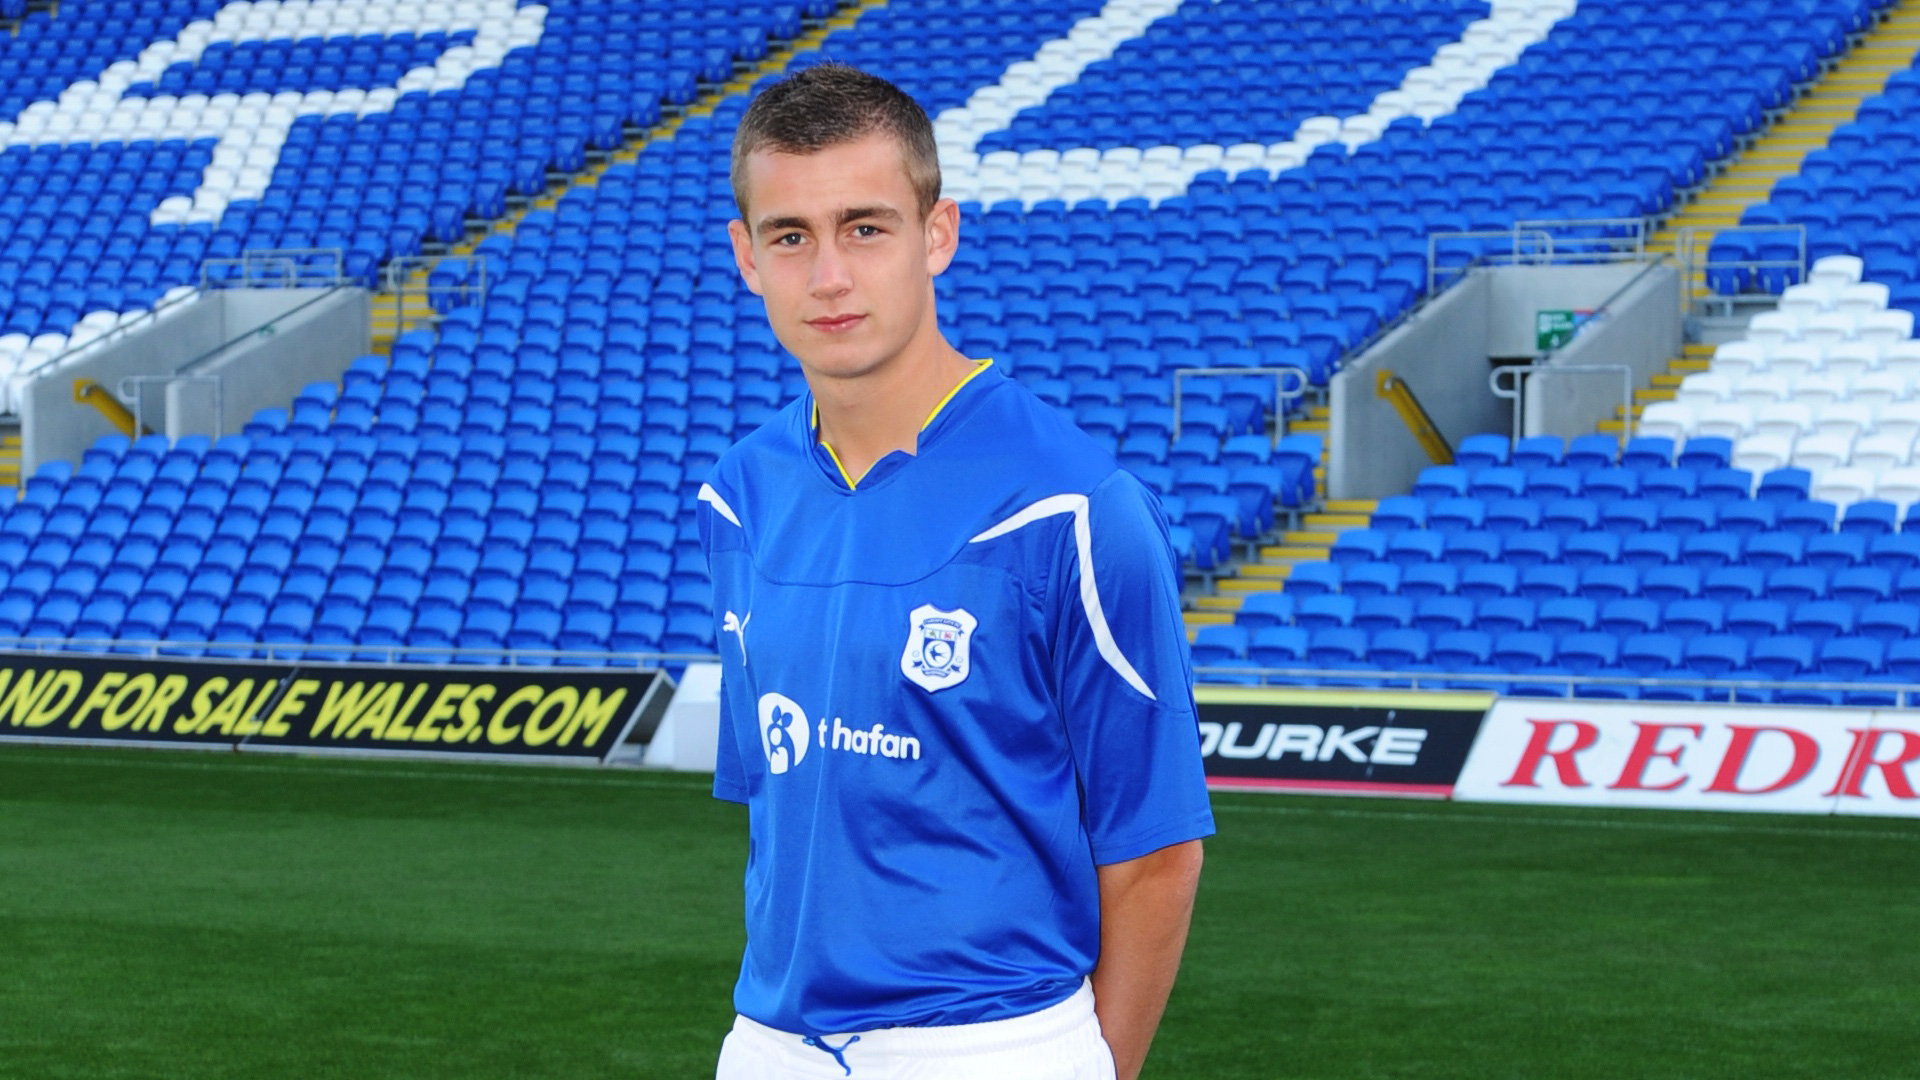 Joe Ralls after joining City's Academy in 2010...